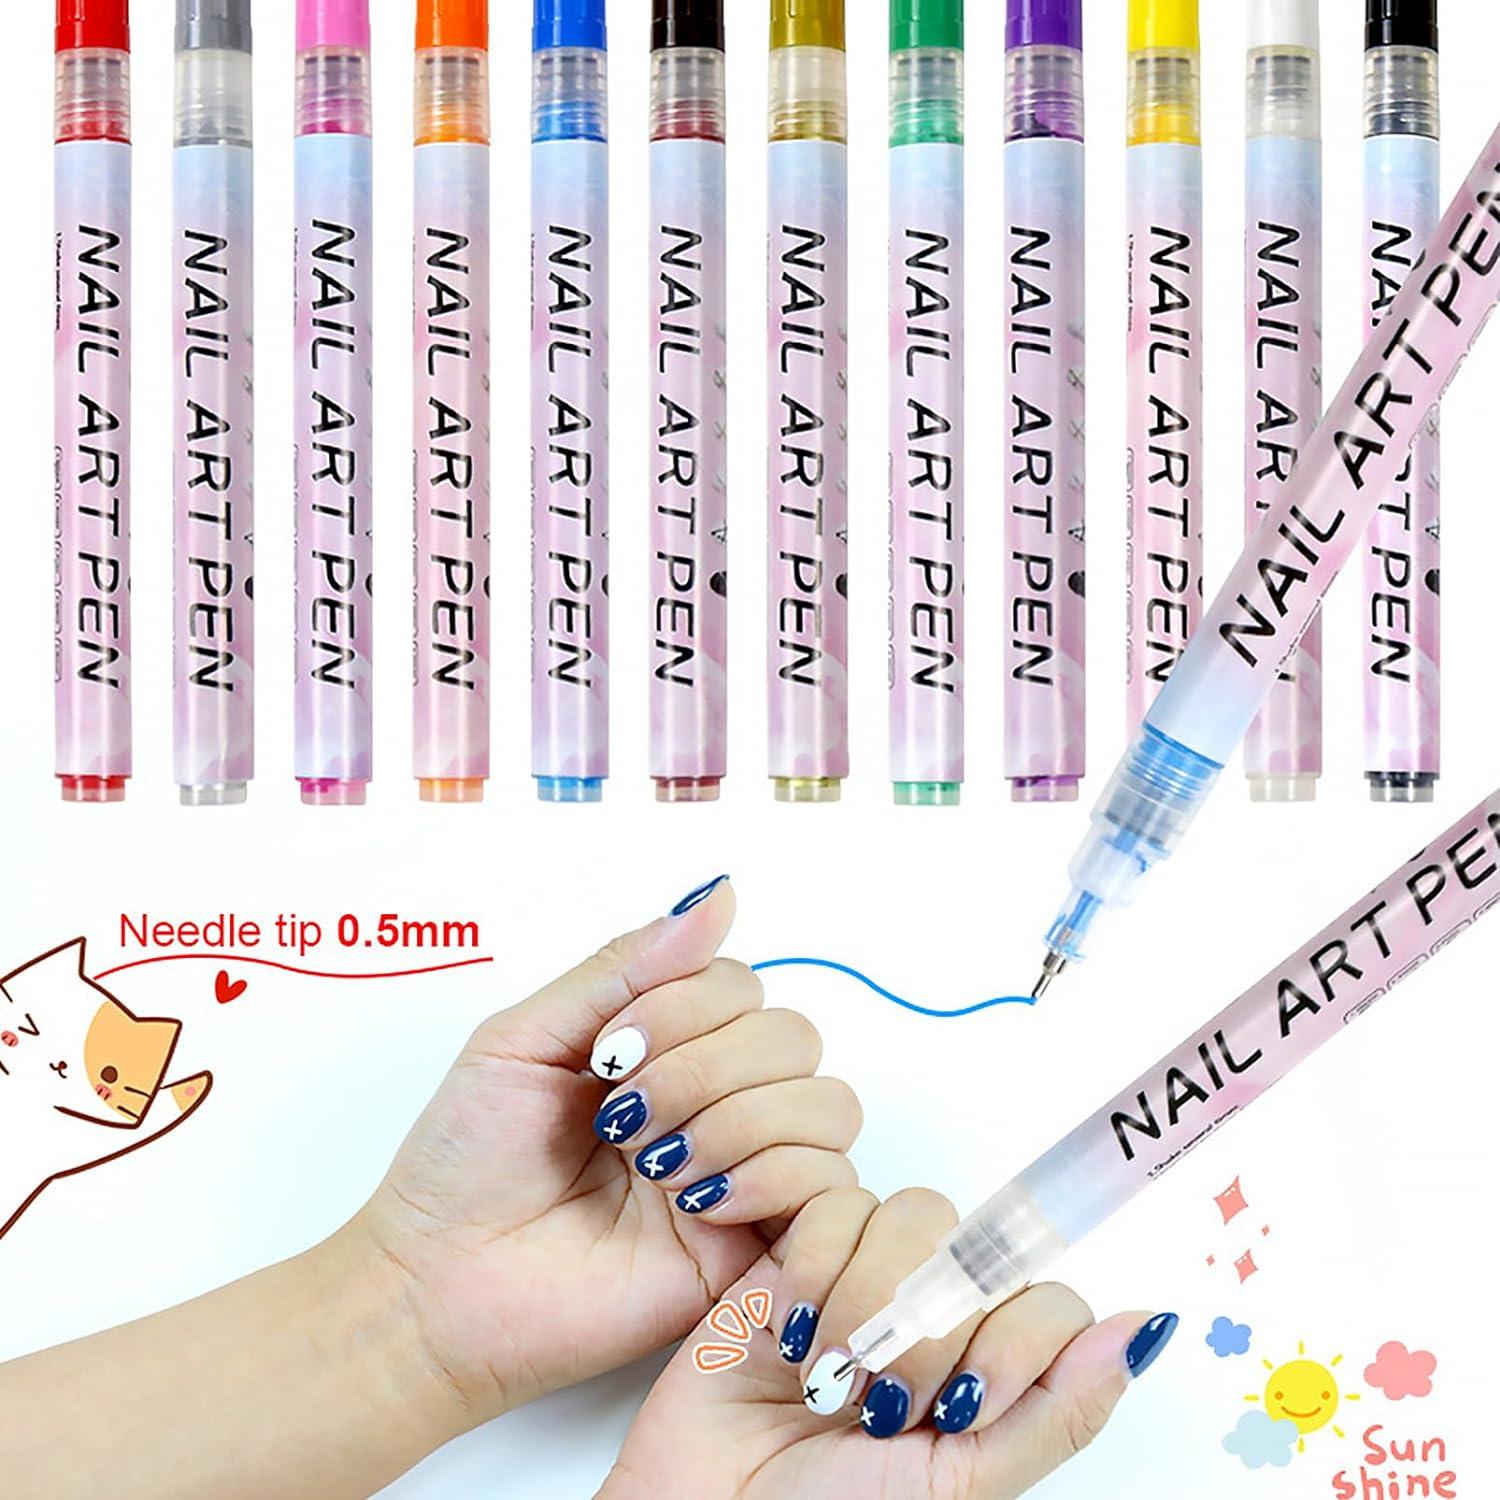 Trind Hand and Nail Care Nail White Pencil | SkinStore